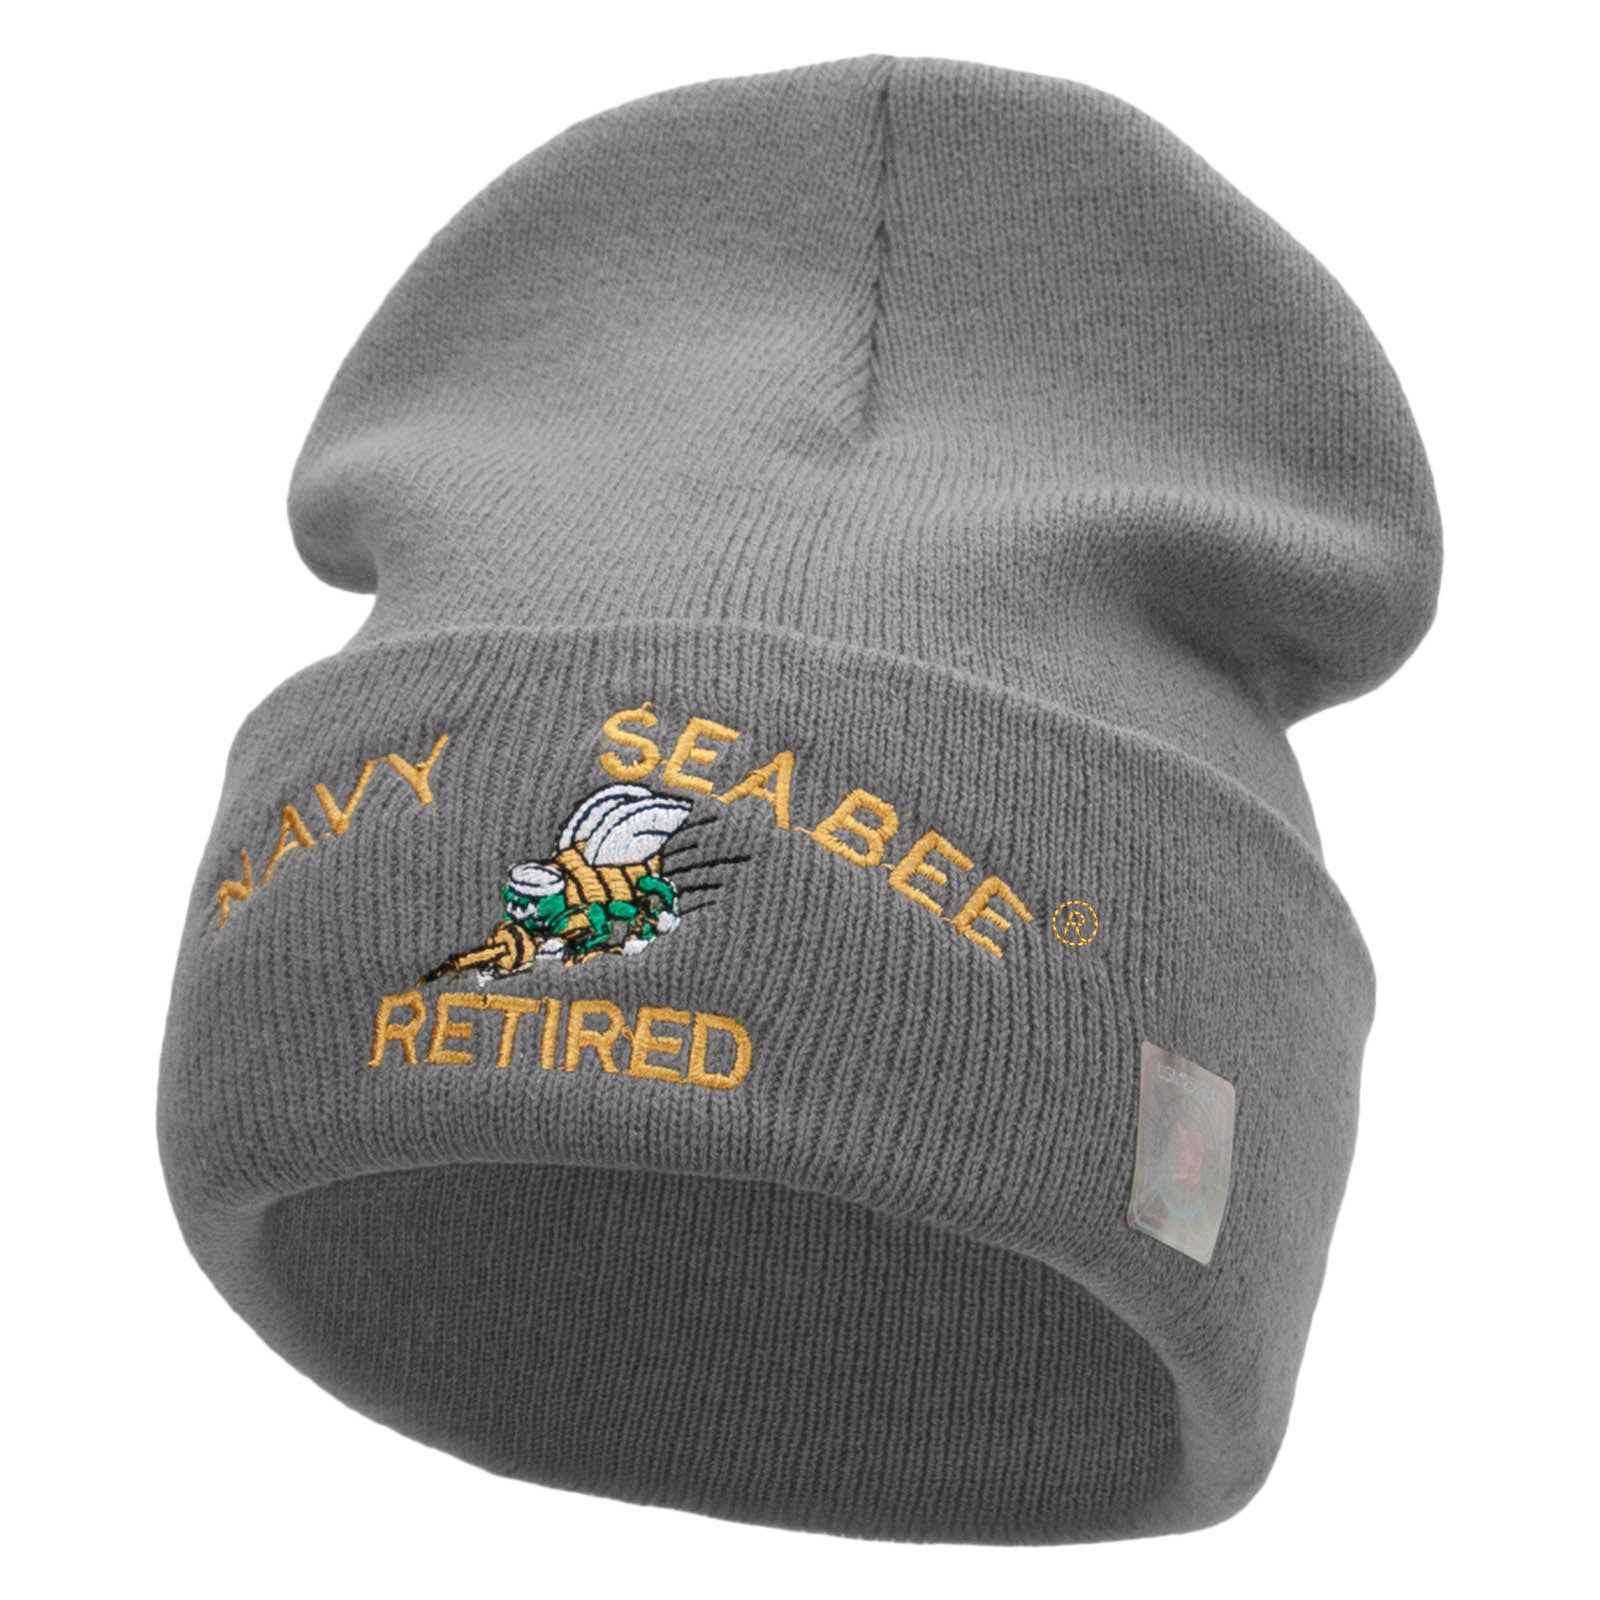 Licensed US Navy Seabee Retired Military Embroidered Long Beanie Made in USA - Lt Grey OSFM